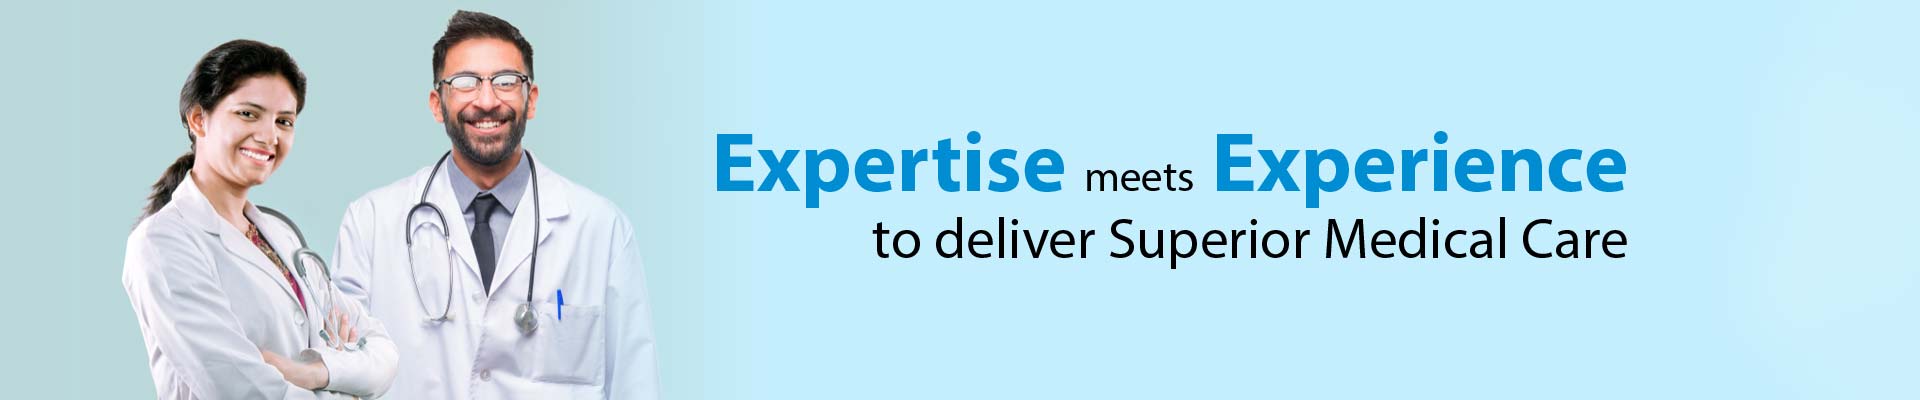 Expertise meets Experience